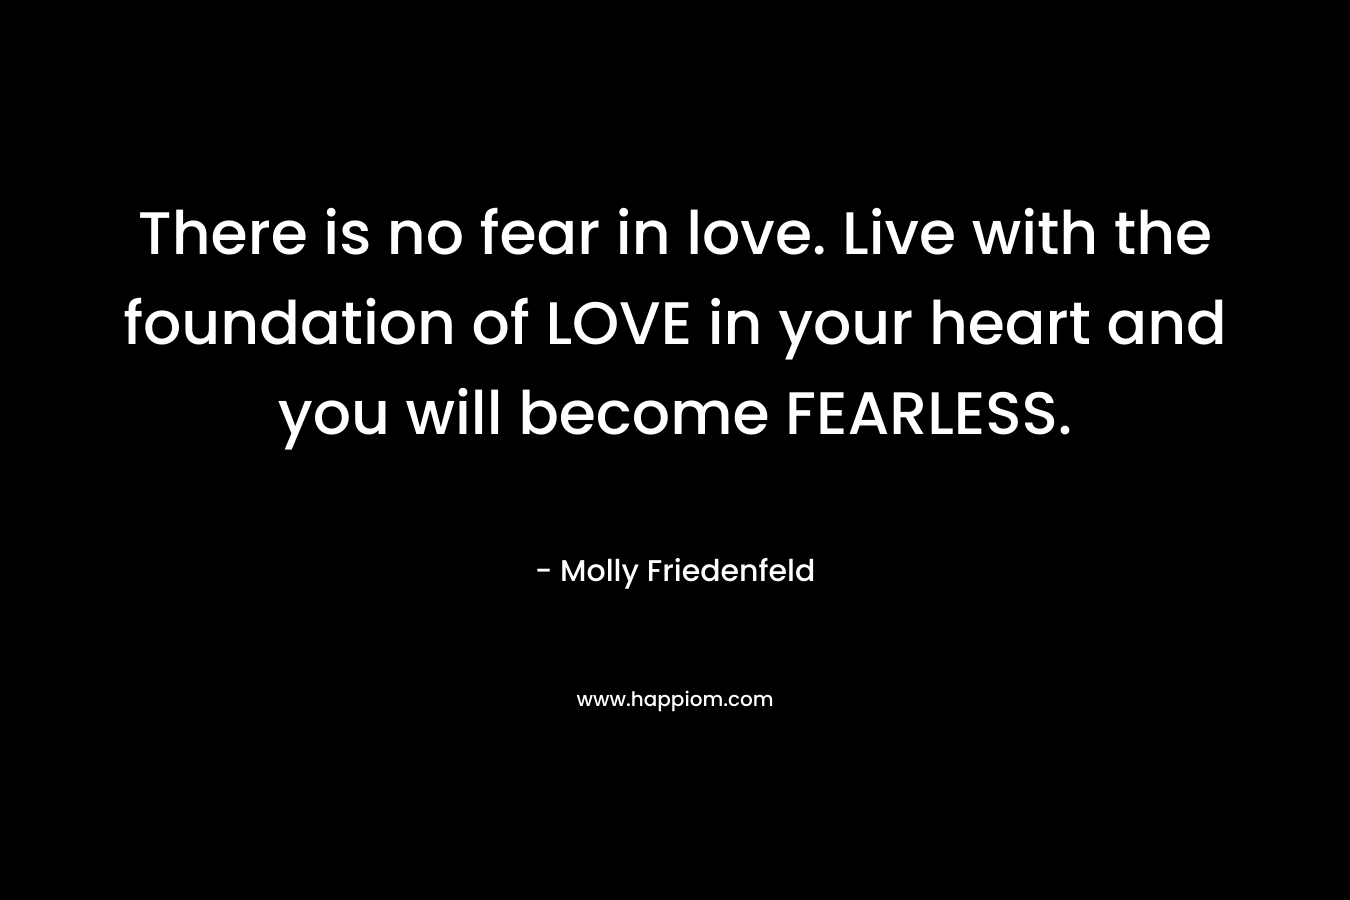 There is no fear in love. Live with the foundation of LOVE in your heart and you will become FEARLESS.